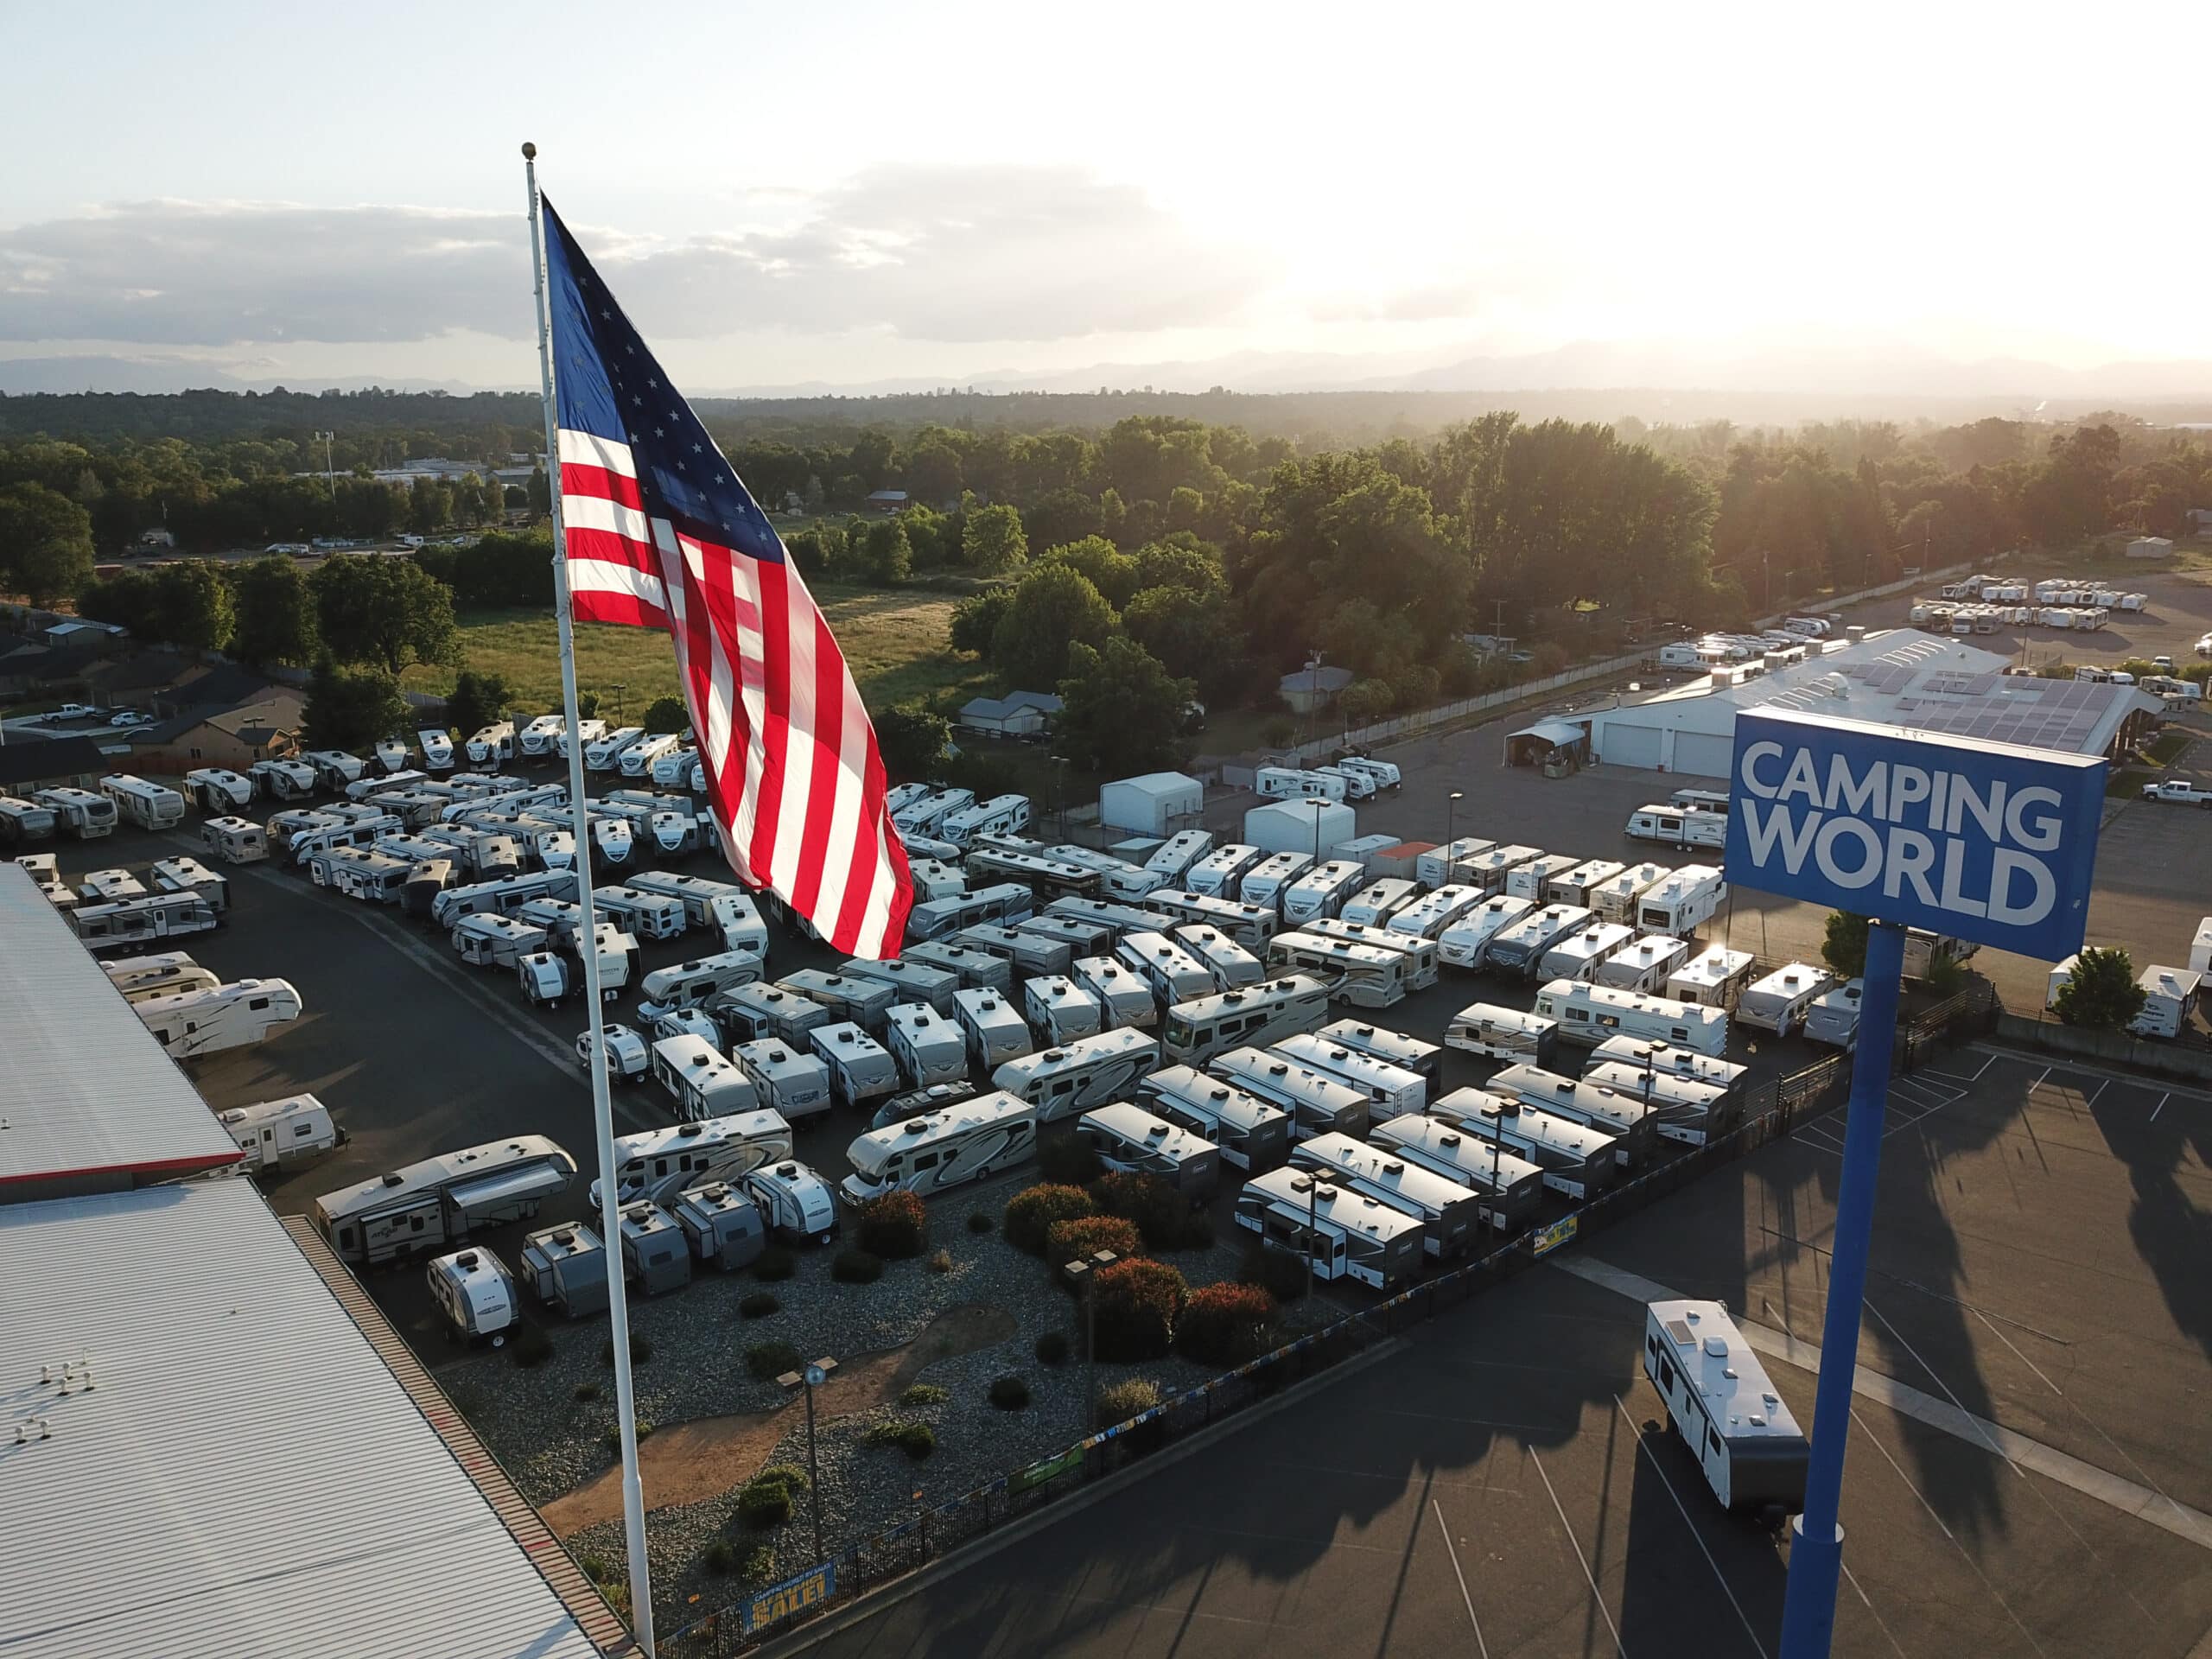 Camping World Opens 191st Dealership in Branson, Mo.